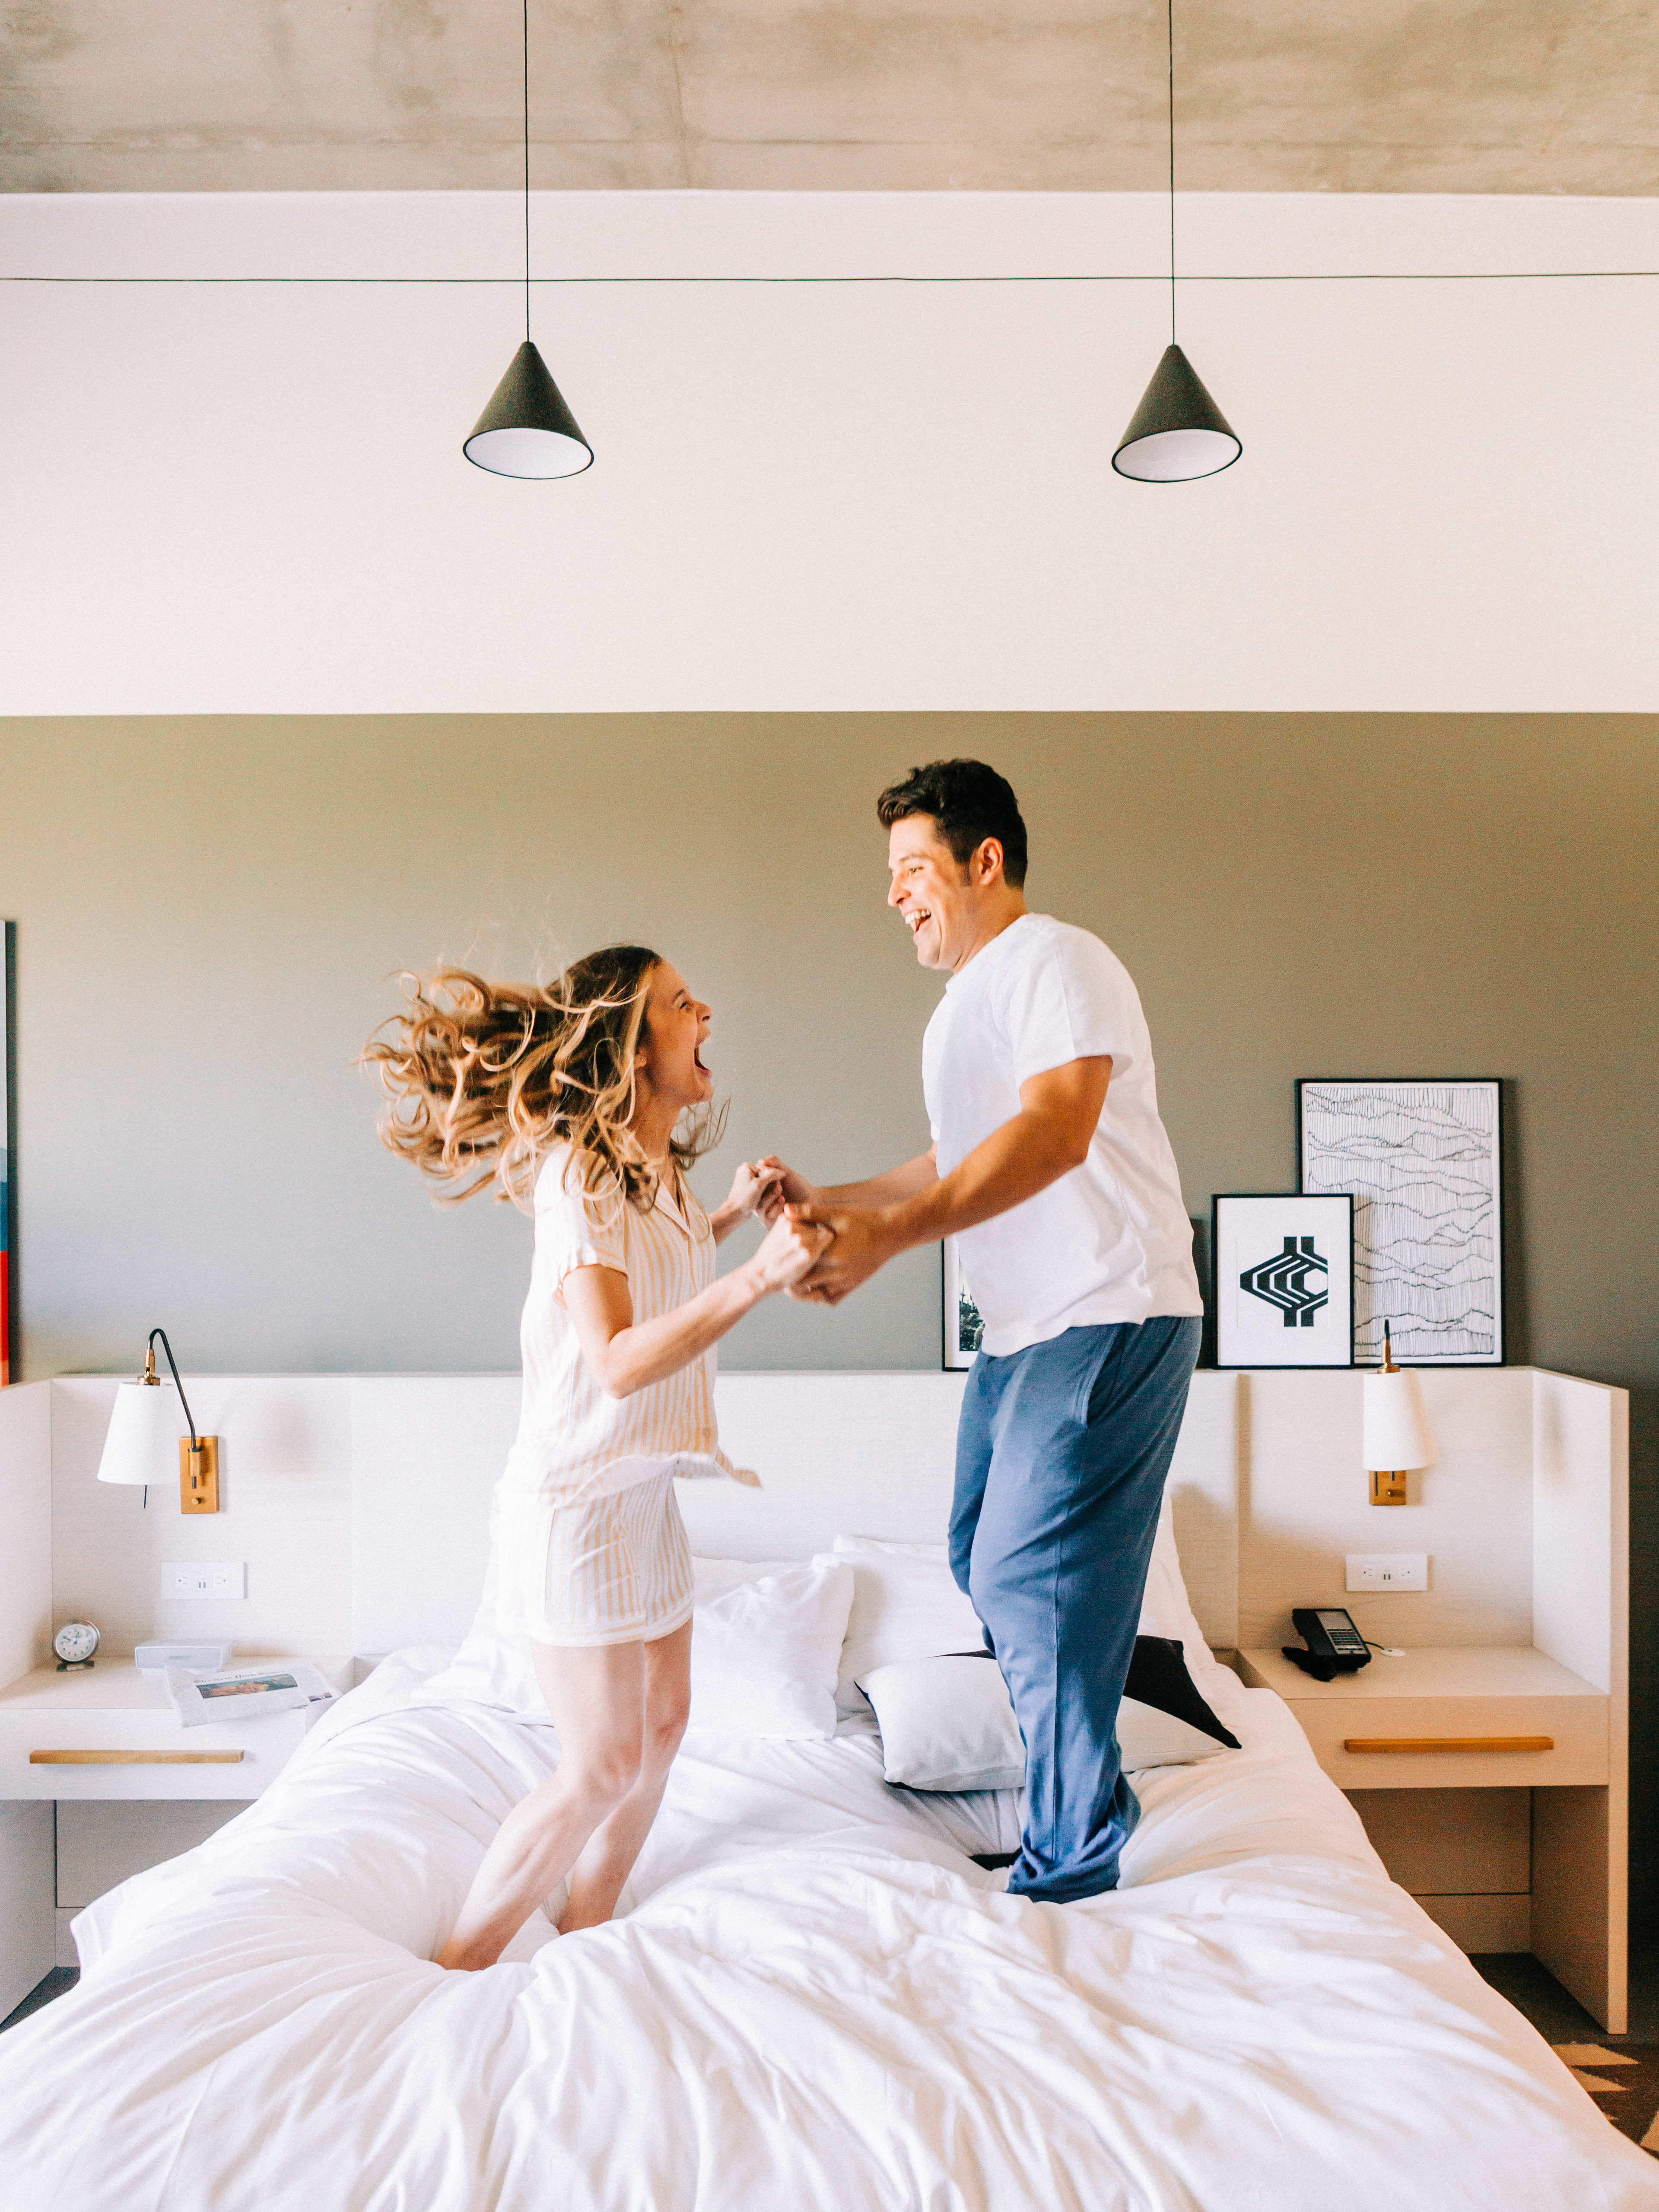 nourish your relationship with positivity - couple laughing and jumping on the bed together 